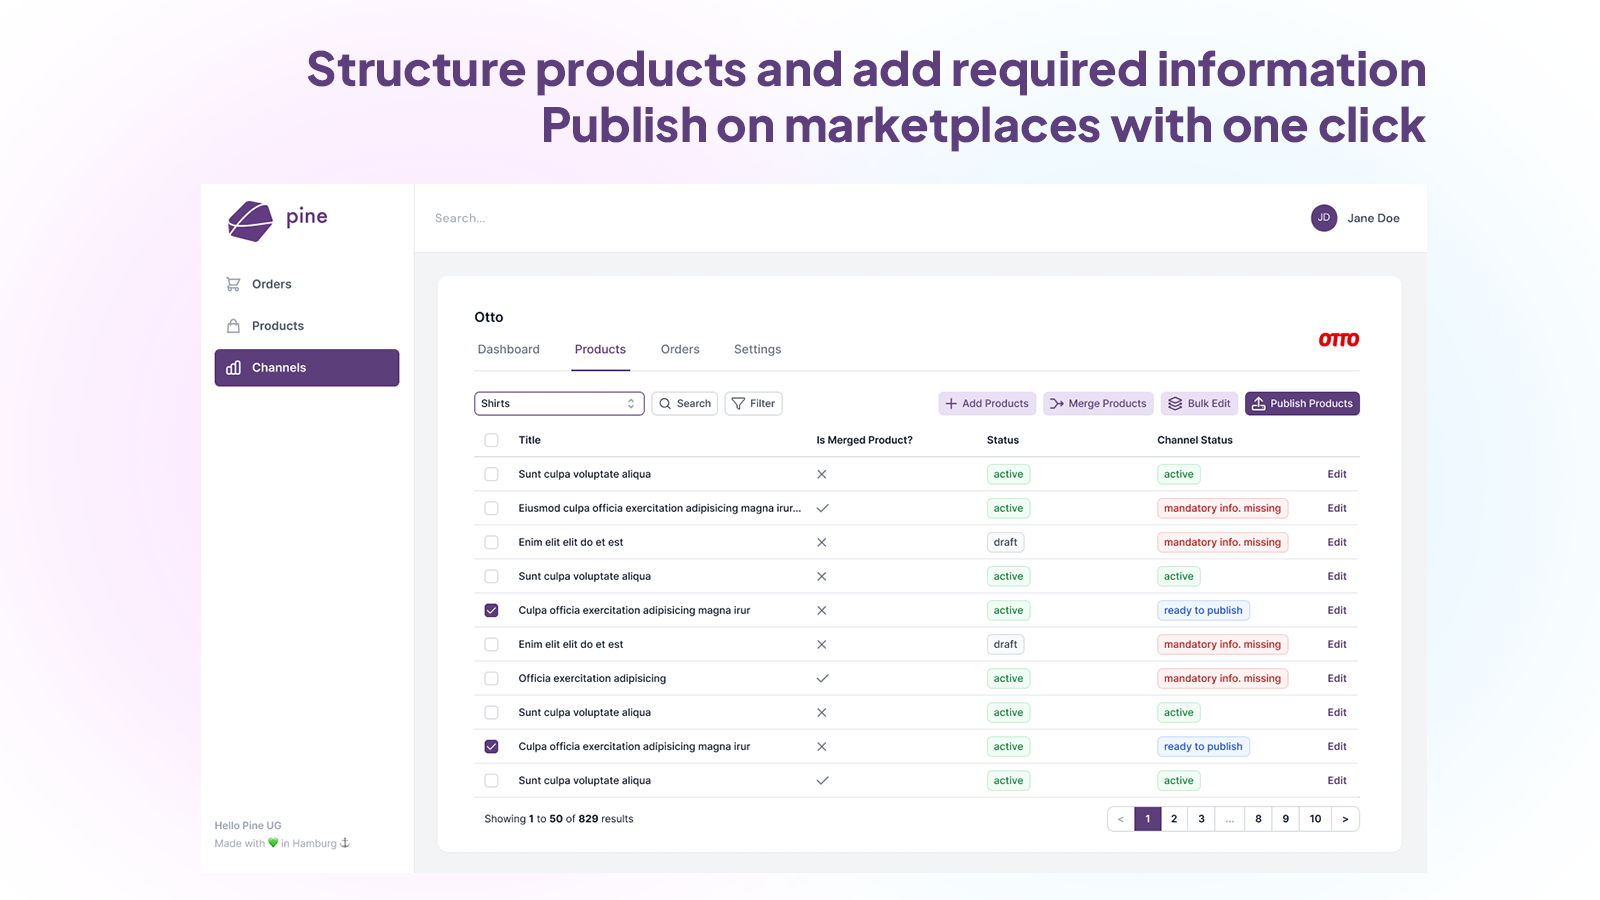 Structure products and add required information. Publish them.